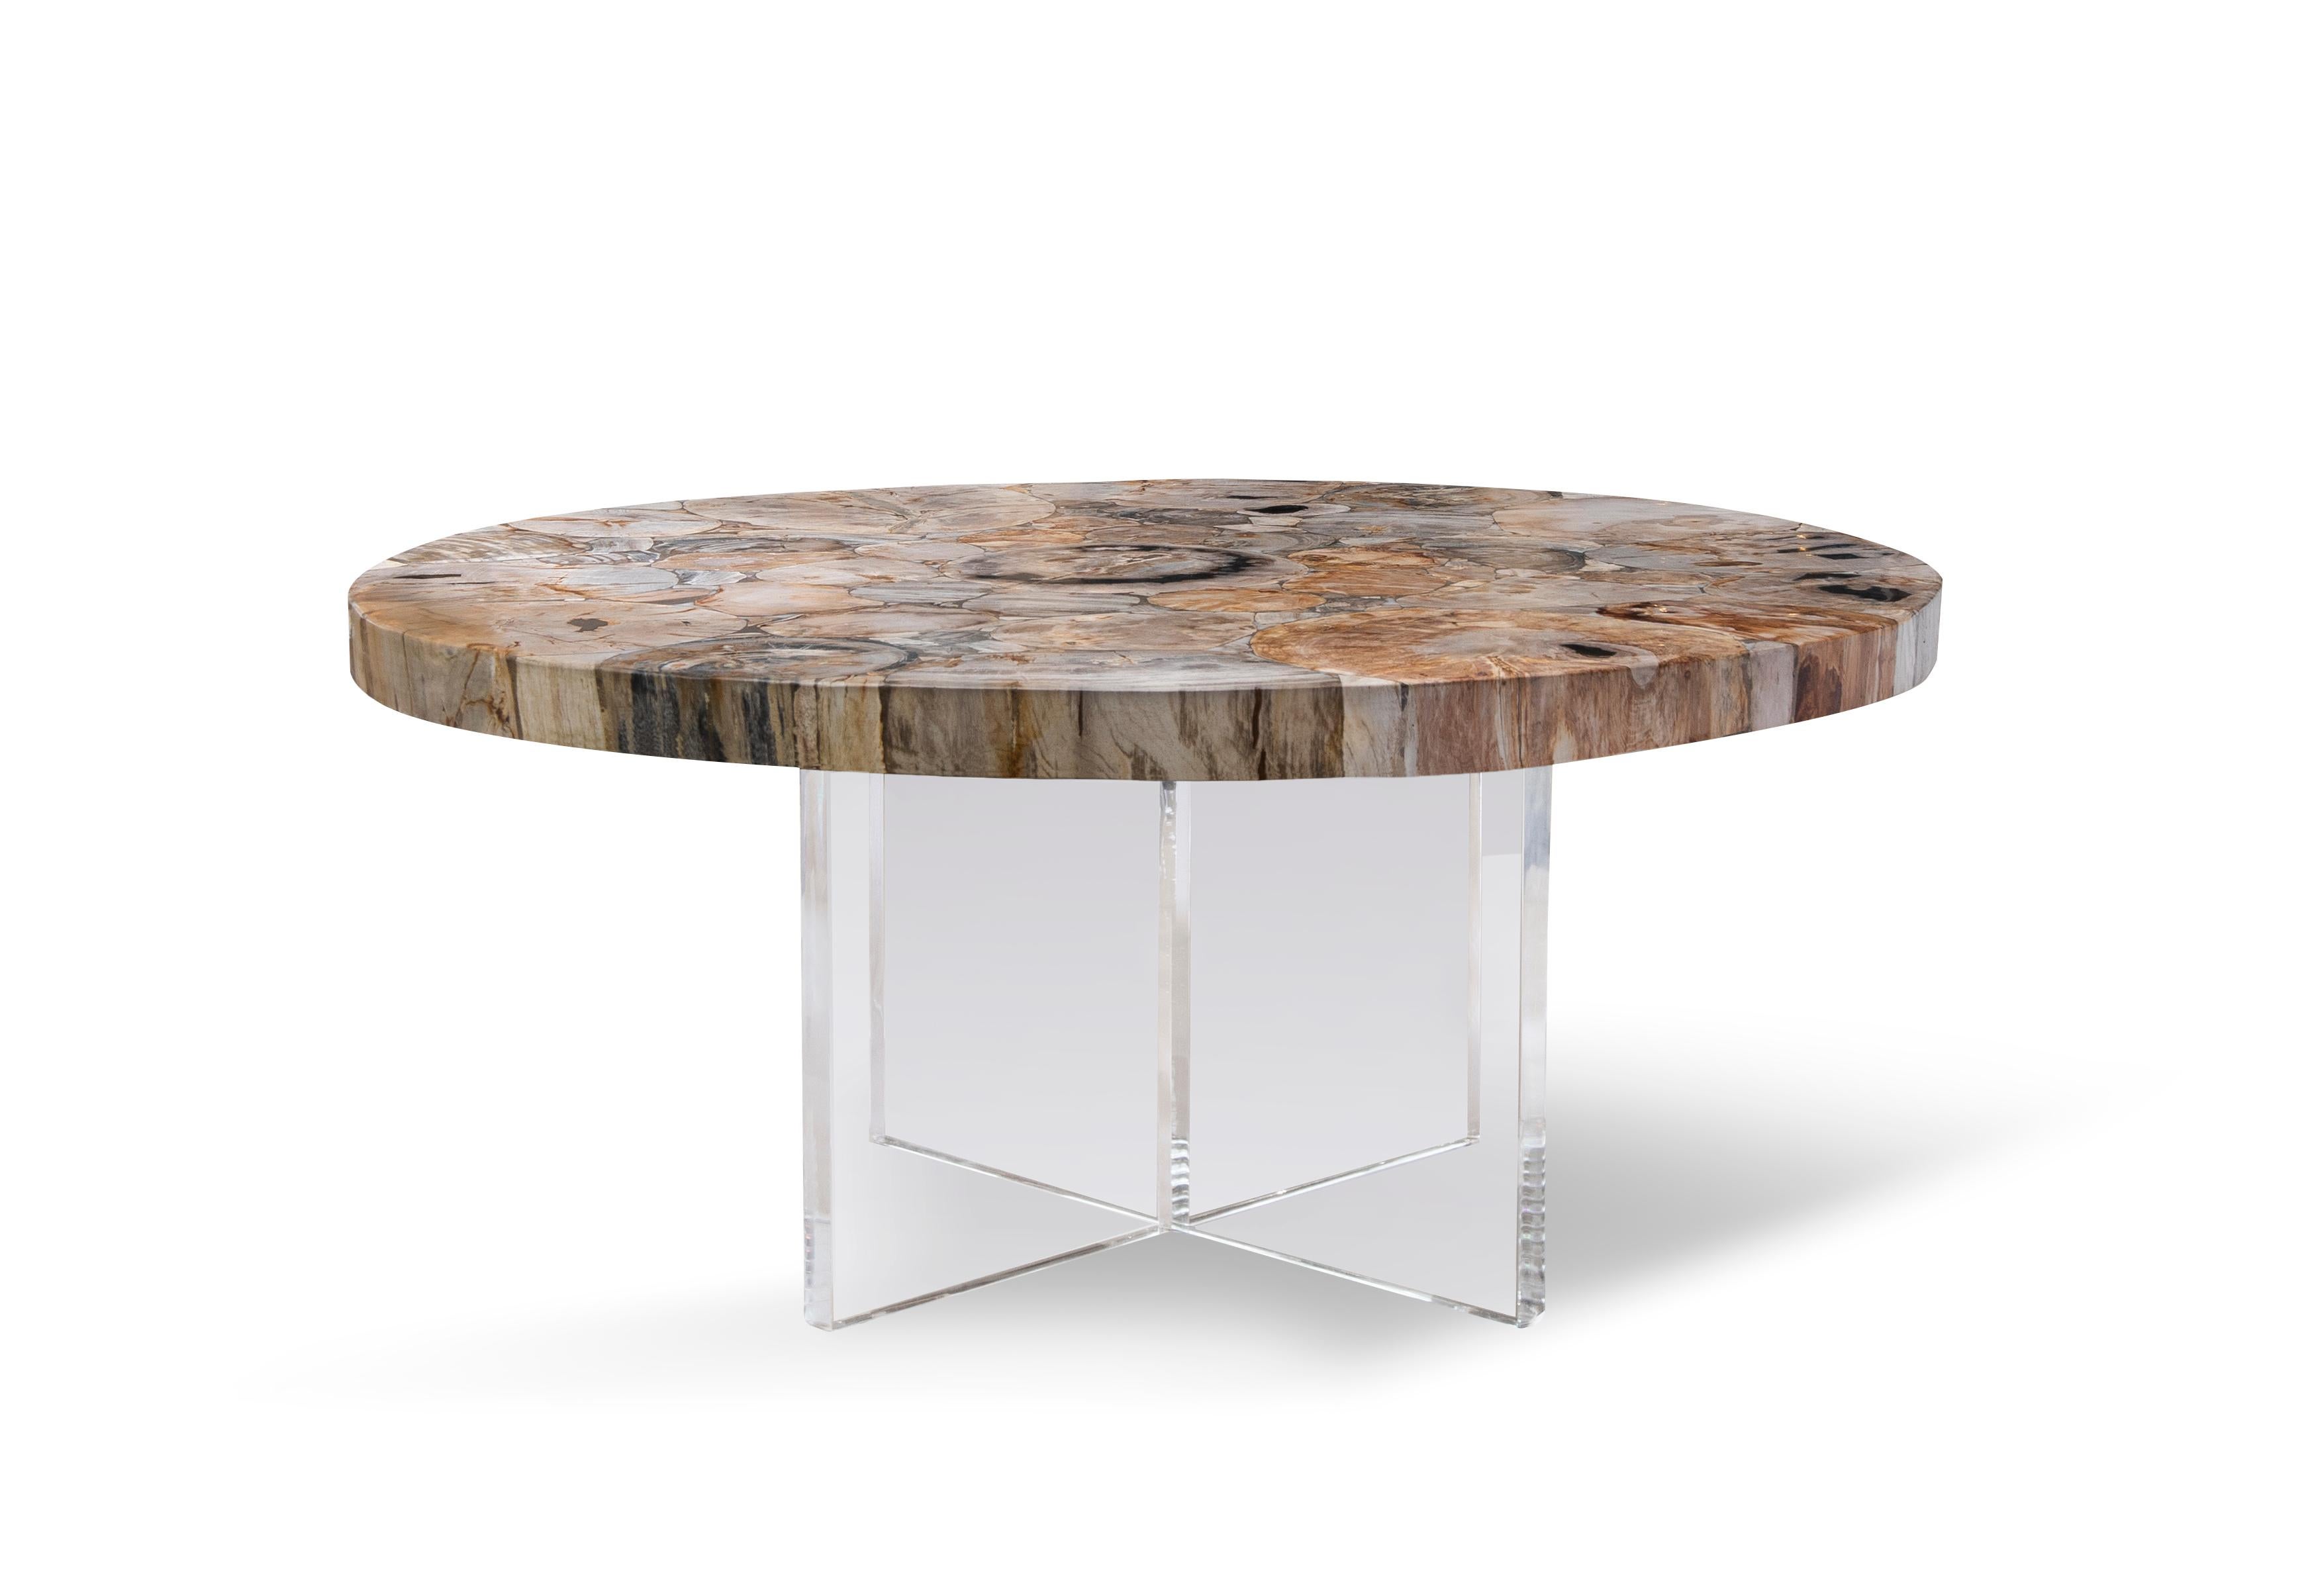 Petra is a coffee table made of petrified wood floating on a white acrylic base.

In Greek mythology, Medusa could turn her beholder into stone just by a look. For wood, this process takes millions of years resulting in a breathtaking beautifully